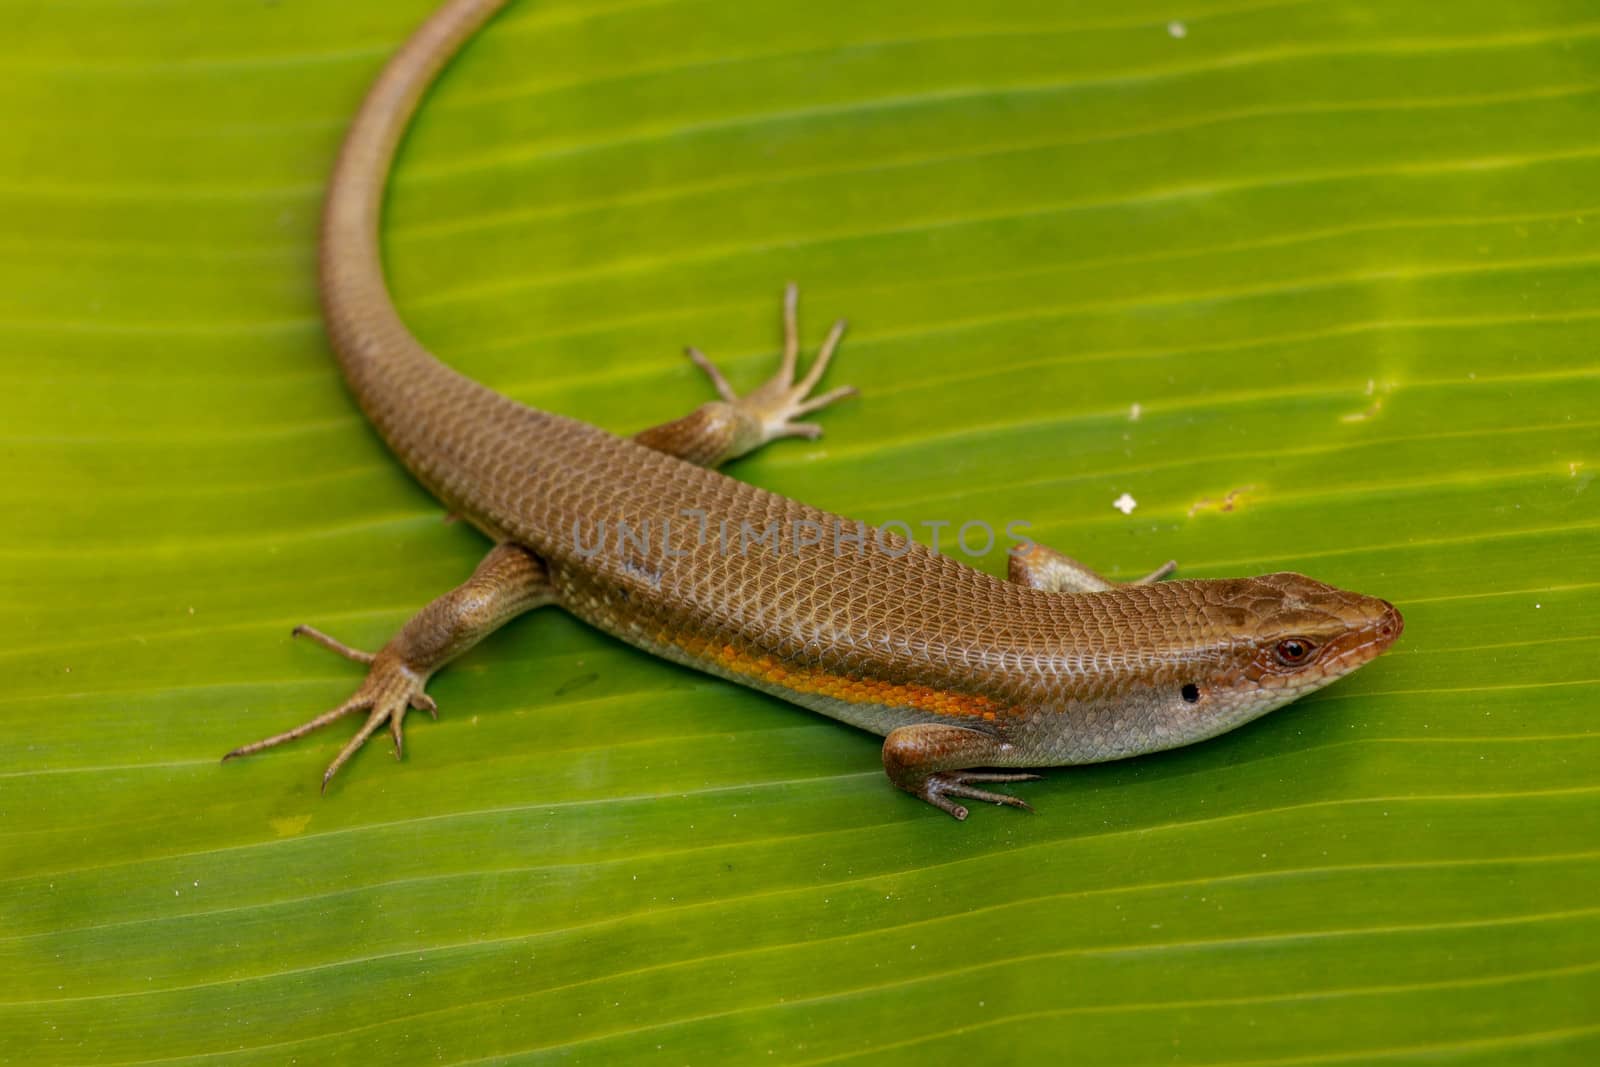 East Indian Brown Skin, Many-lined Sun Skink, or Common Sun Skink, while the scientific name, Eutropis multifasciata, East Indian Brown Skink in the wild. Lizards on green leave. Nature background by Sanatana2008